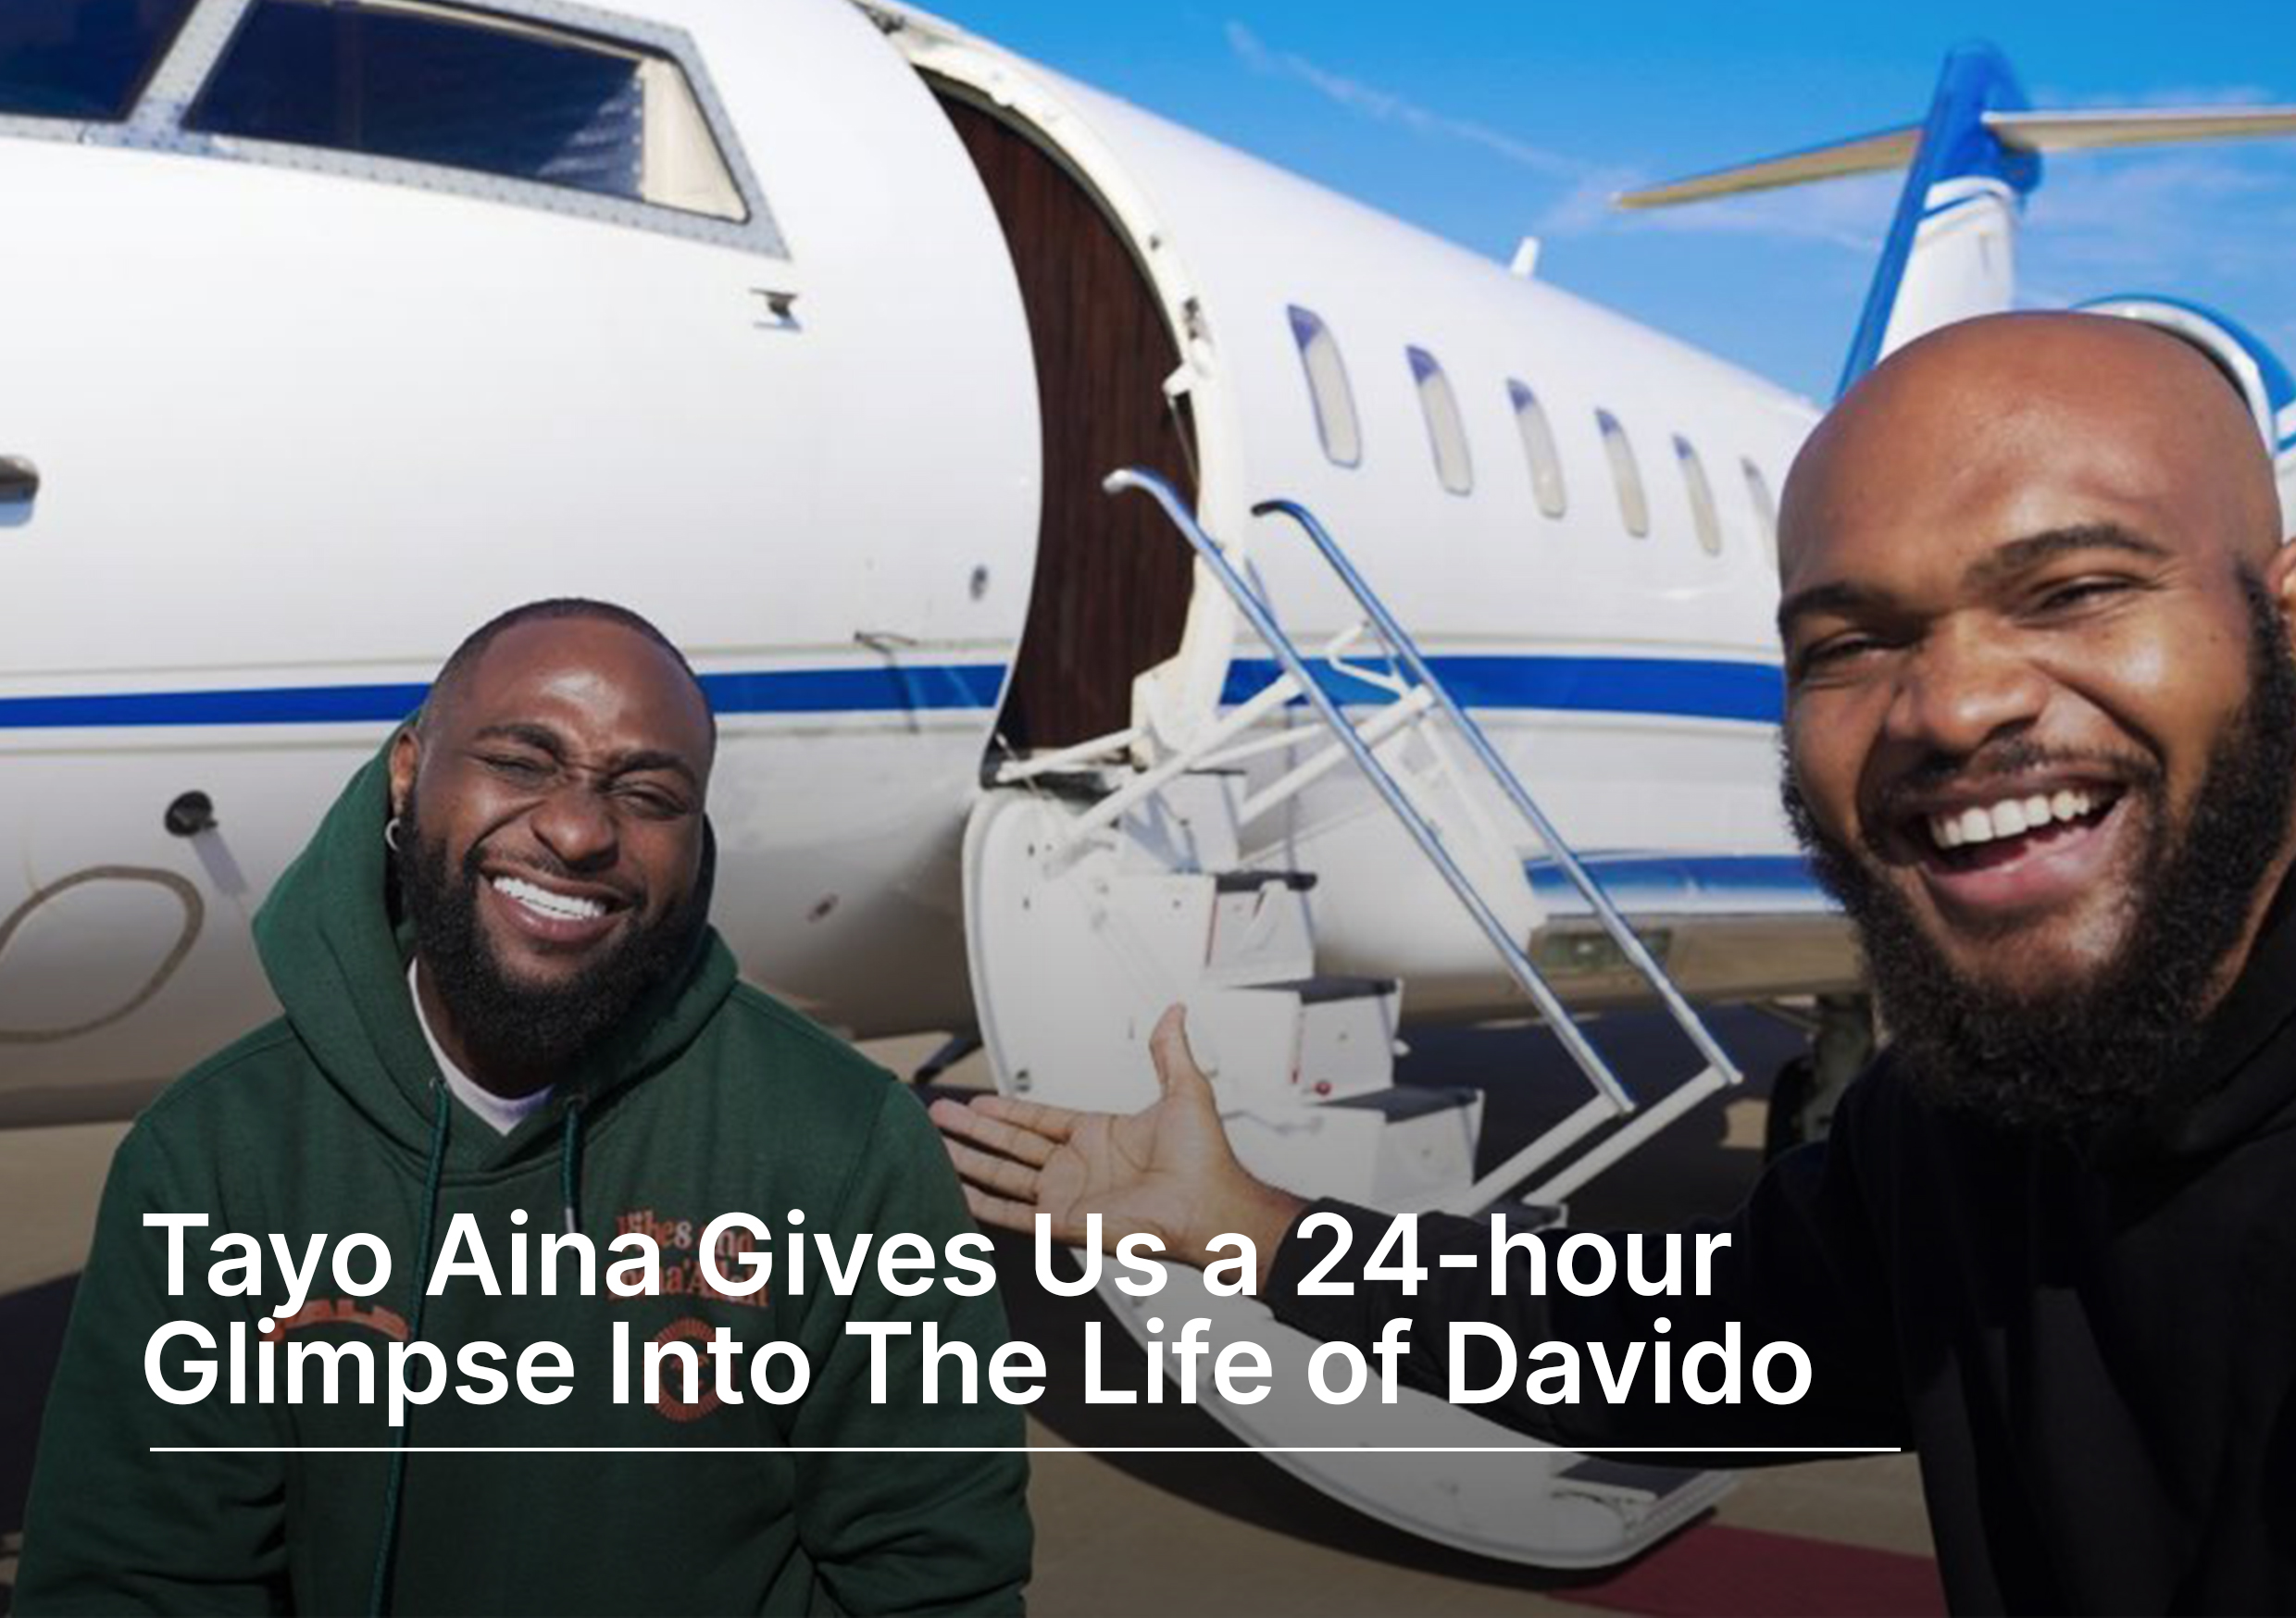 Davido and Tayo Aina taking a selfie in front of a private jet.